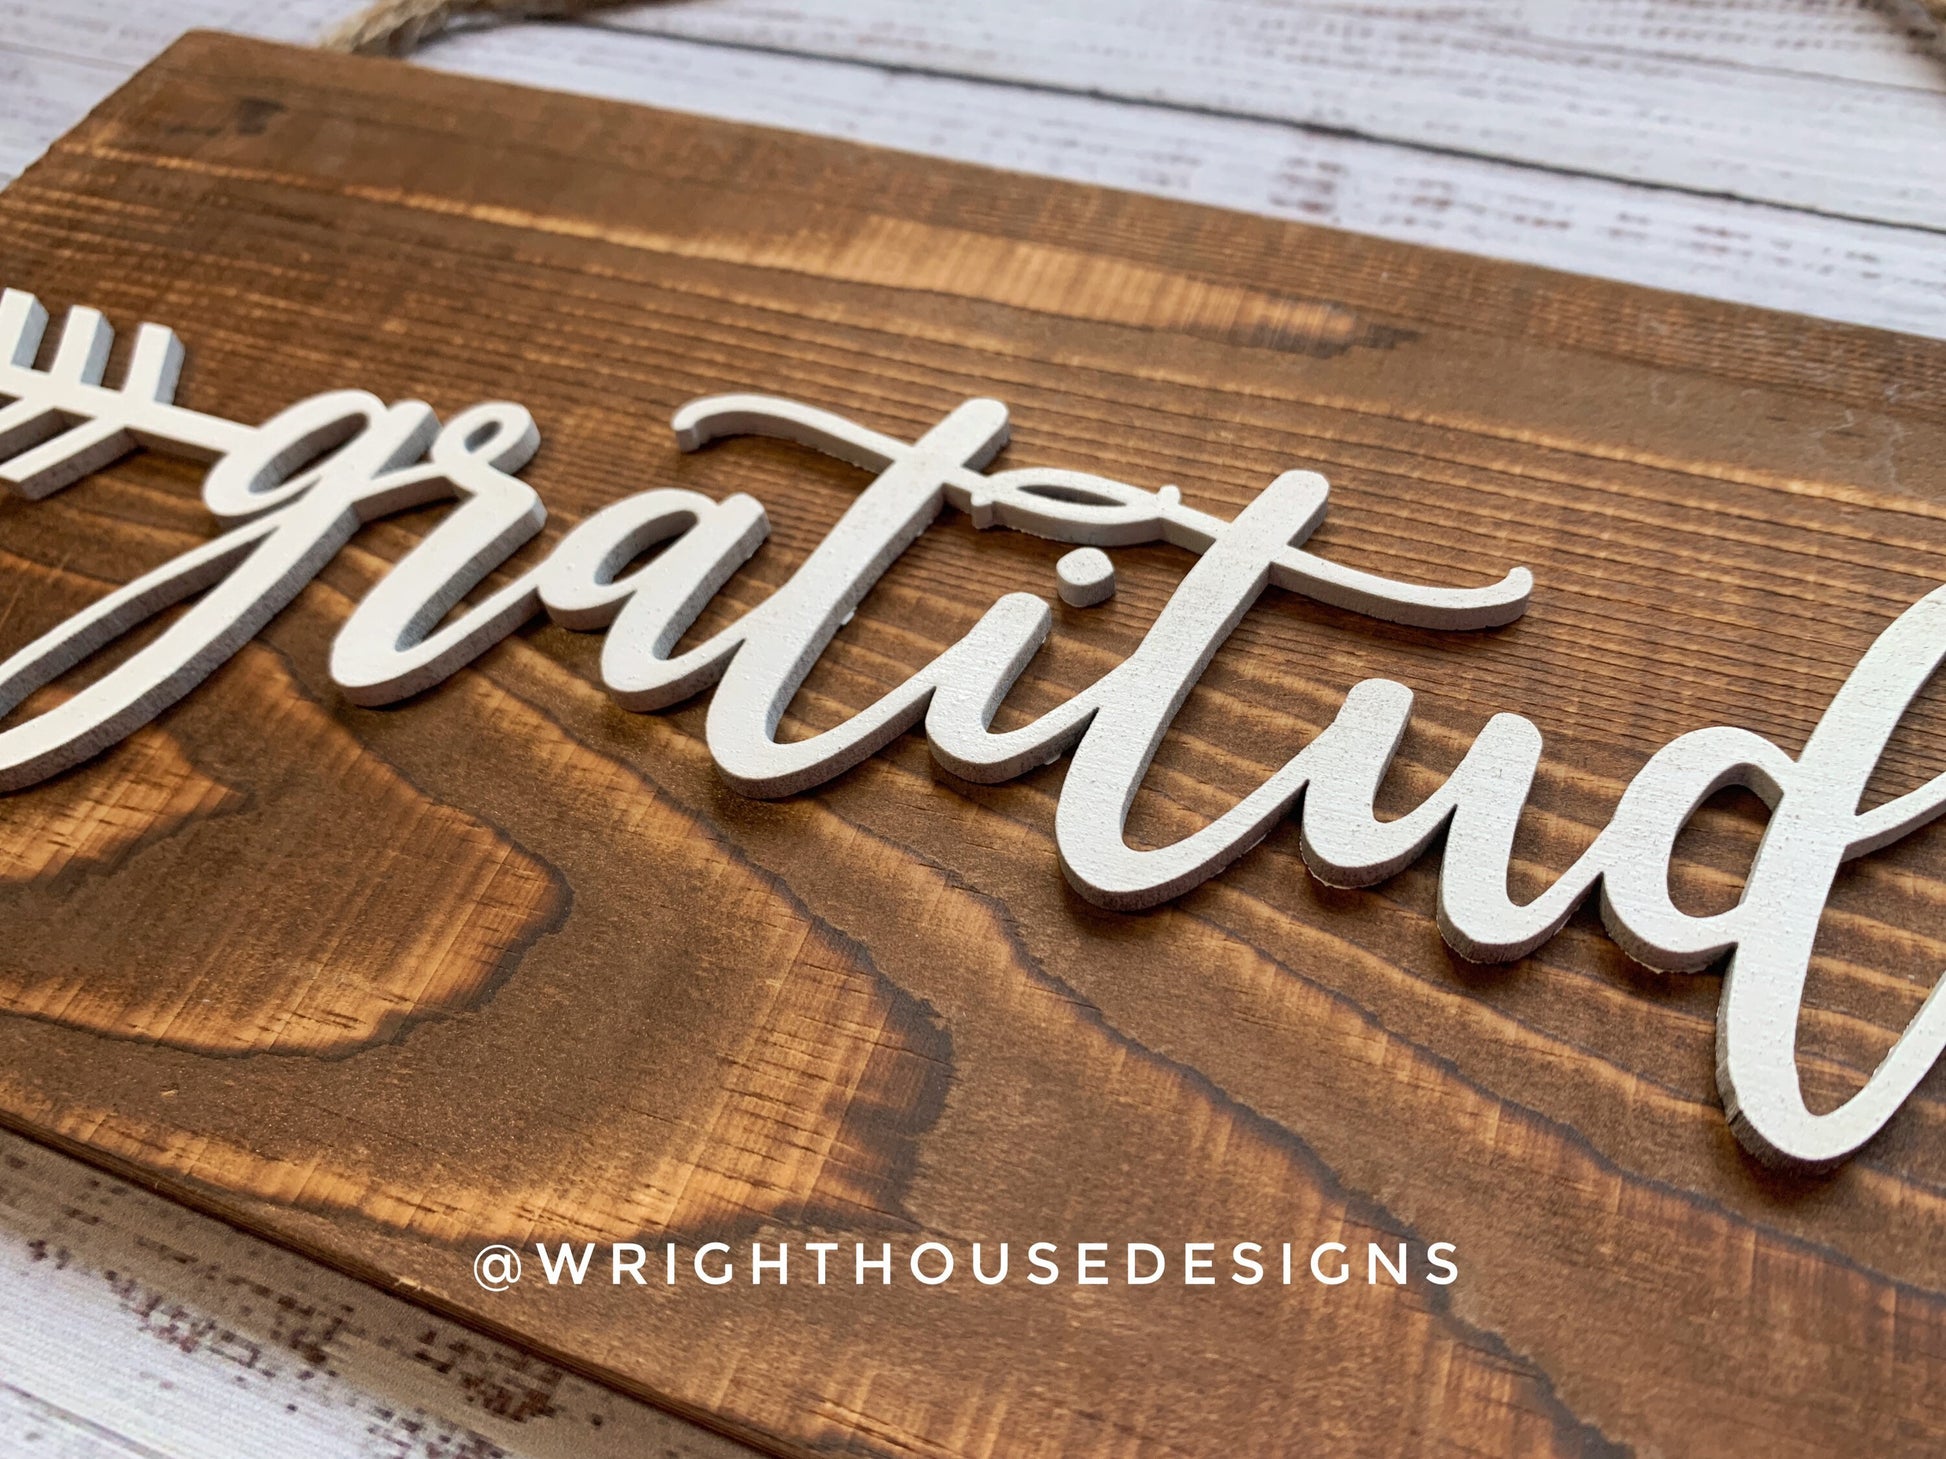 Gratitude - Arrow Word Art - Rustic Farmhouse - Reclaimed Pallet Plank Board Sign - Wooden Wall Art - Bookshelf Decor and She Shed Signs